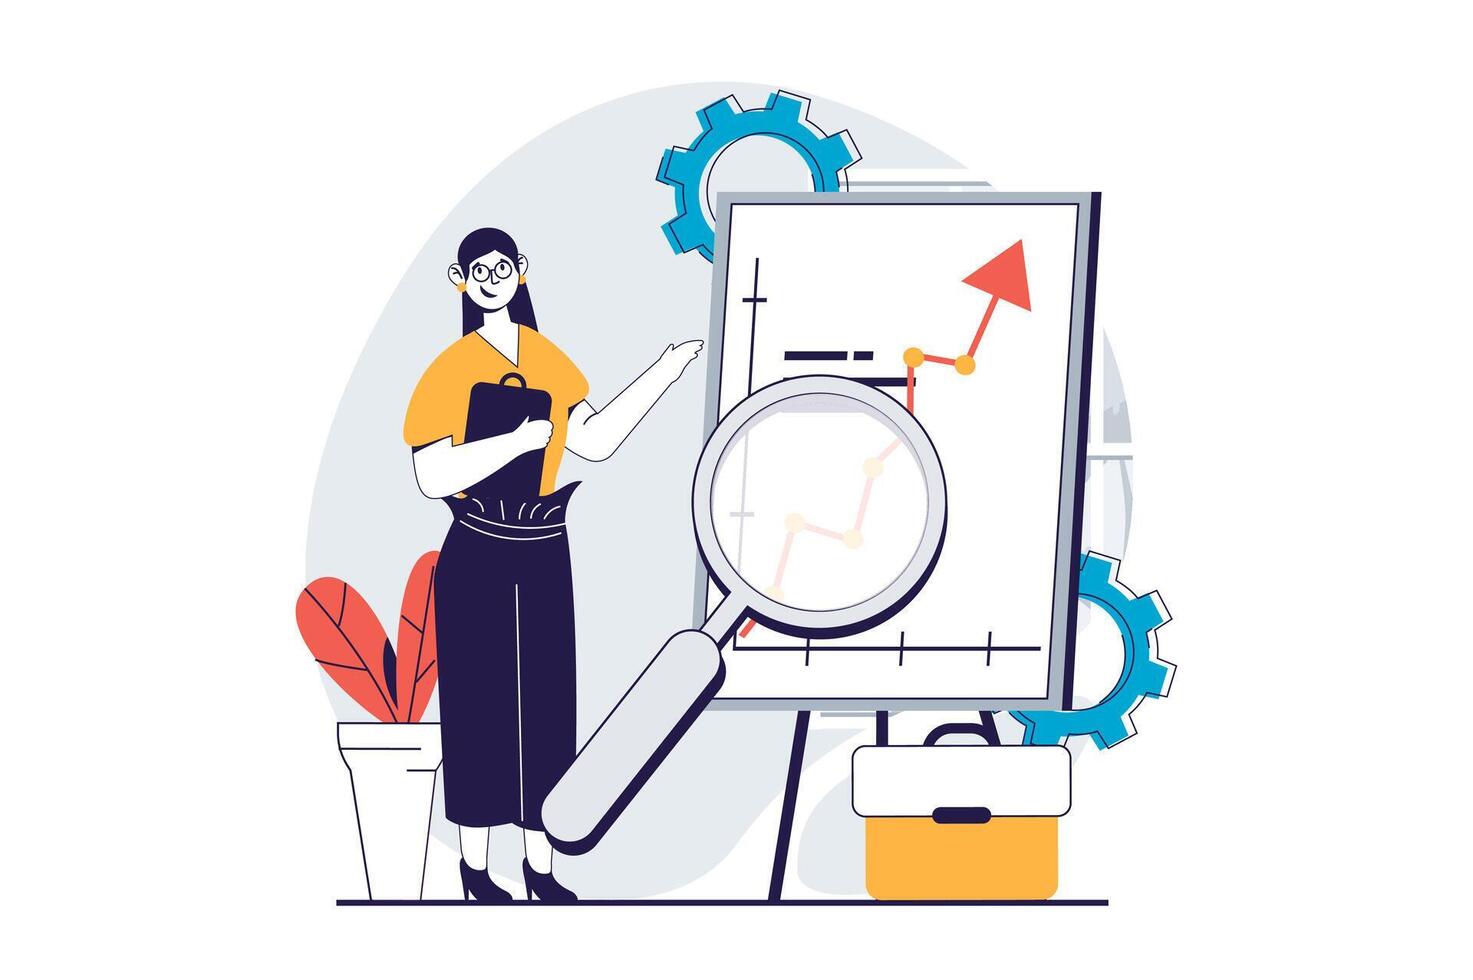 Global economic concept with people scene in flat design for web. Businesswoman researching and analyzes world financial data growth. Vector illustration for social media banner, marketing material.